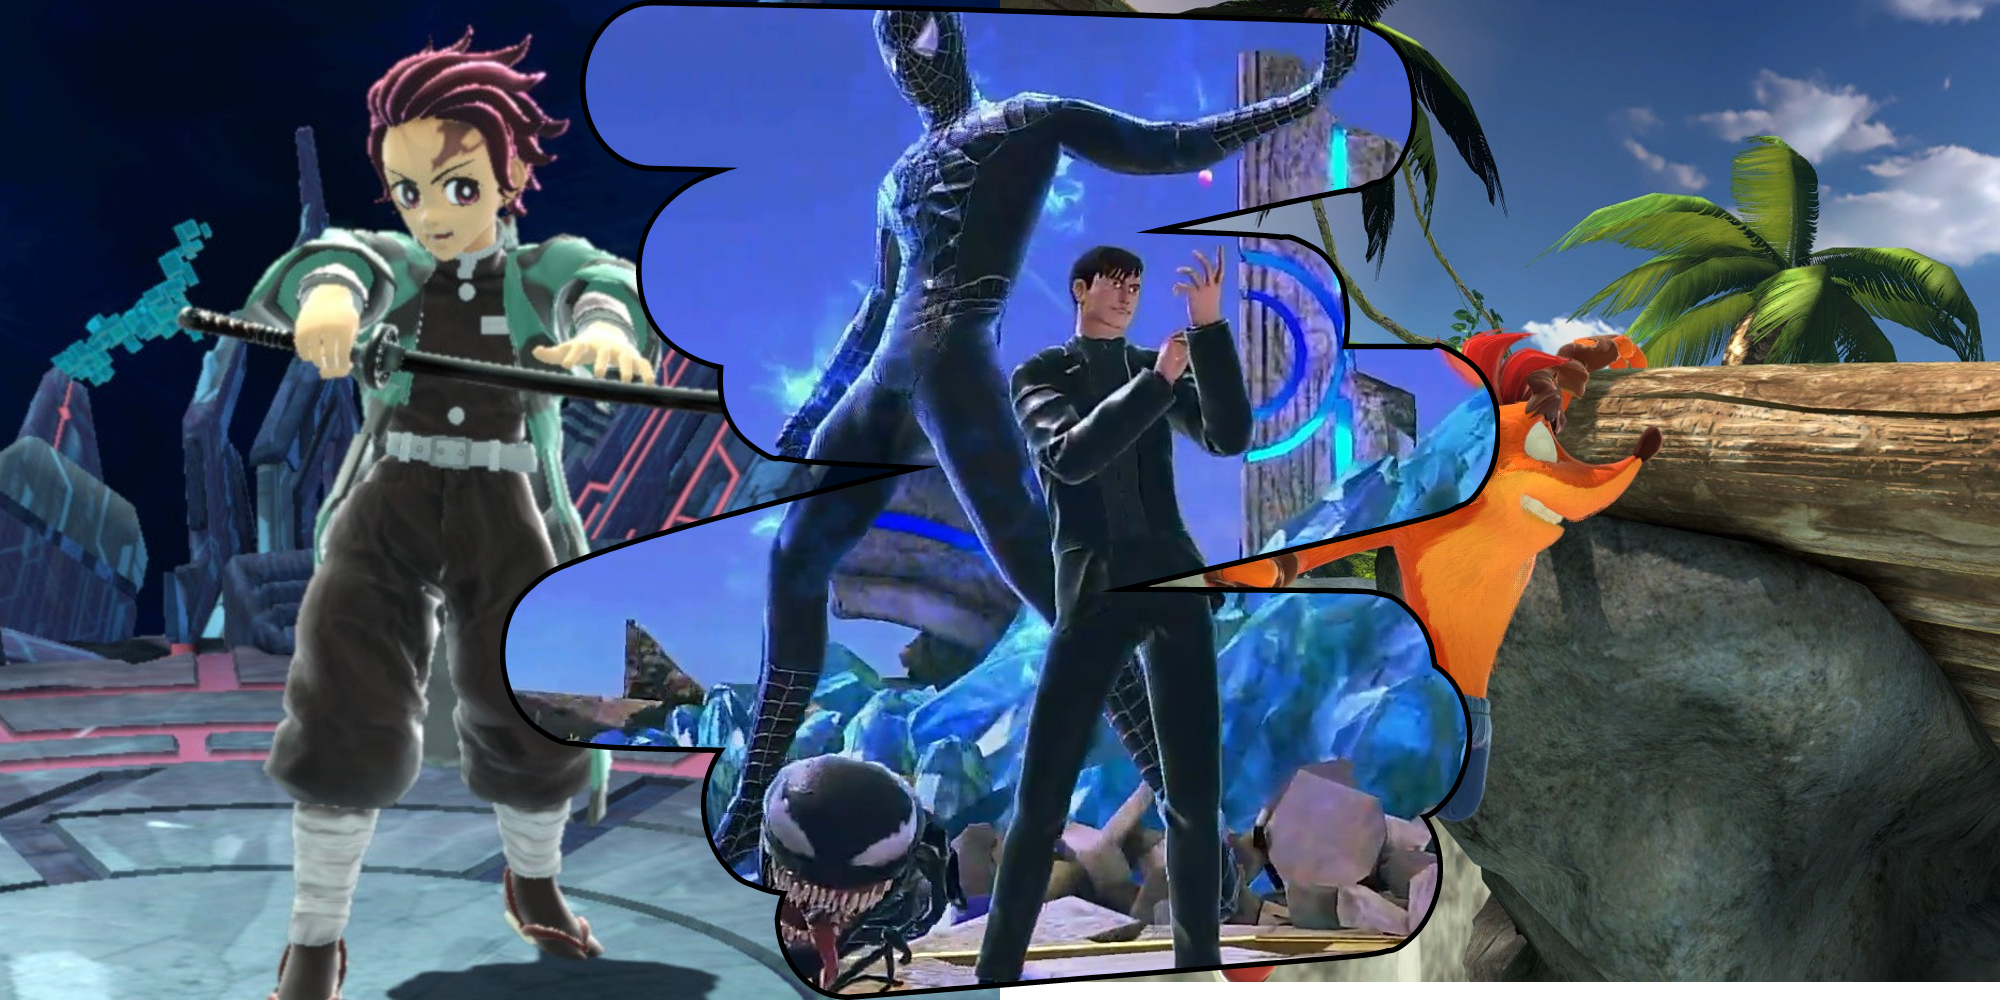 tanjiro, bully maguire, and crash in super smash bros. ultimate